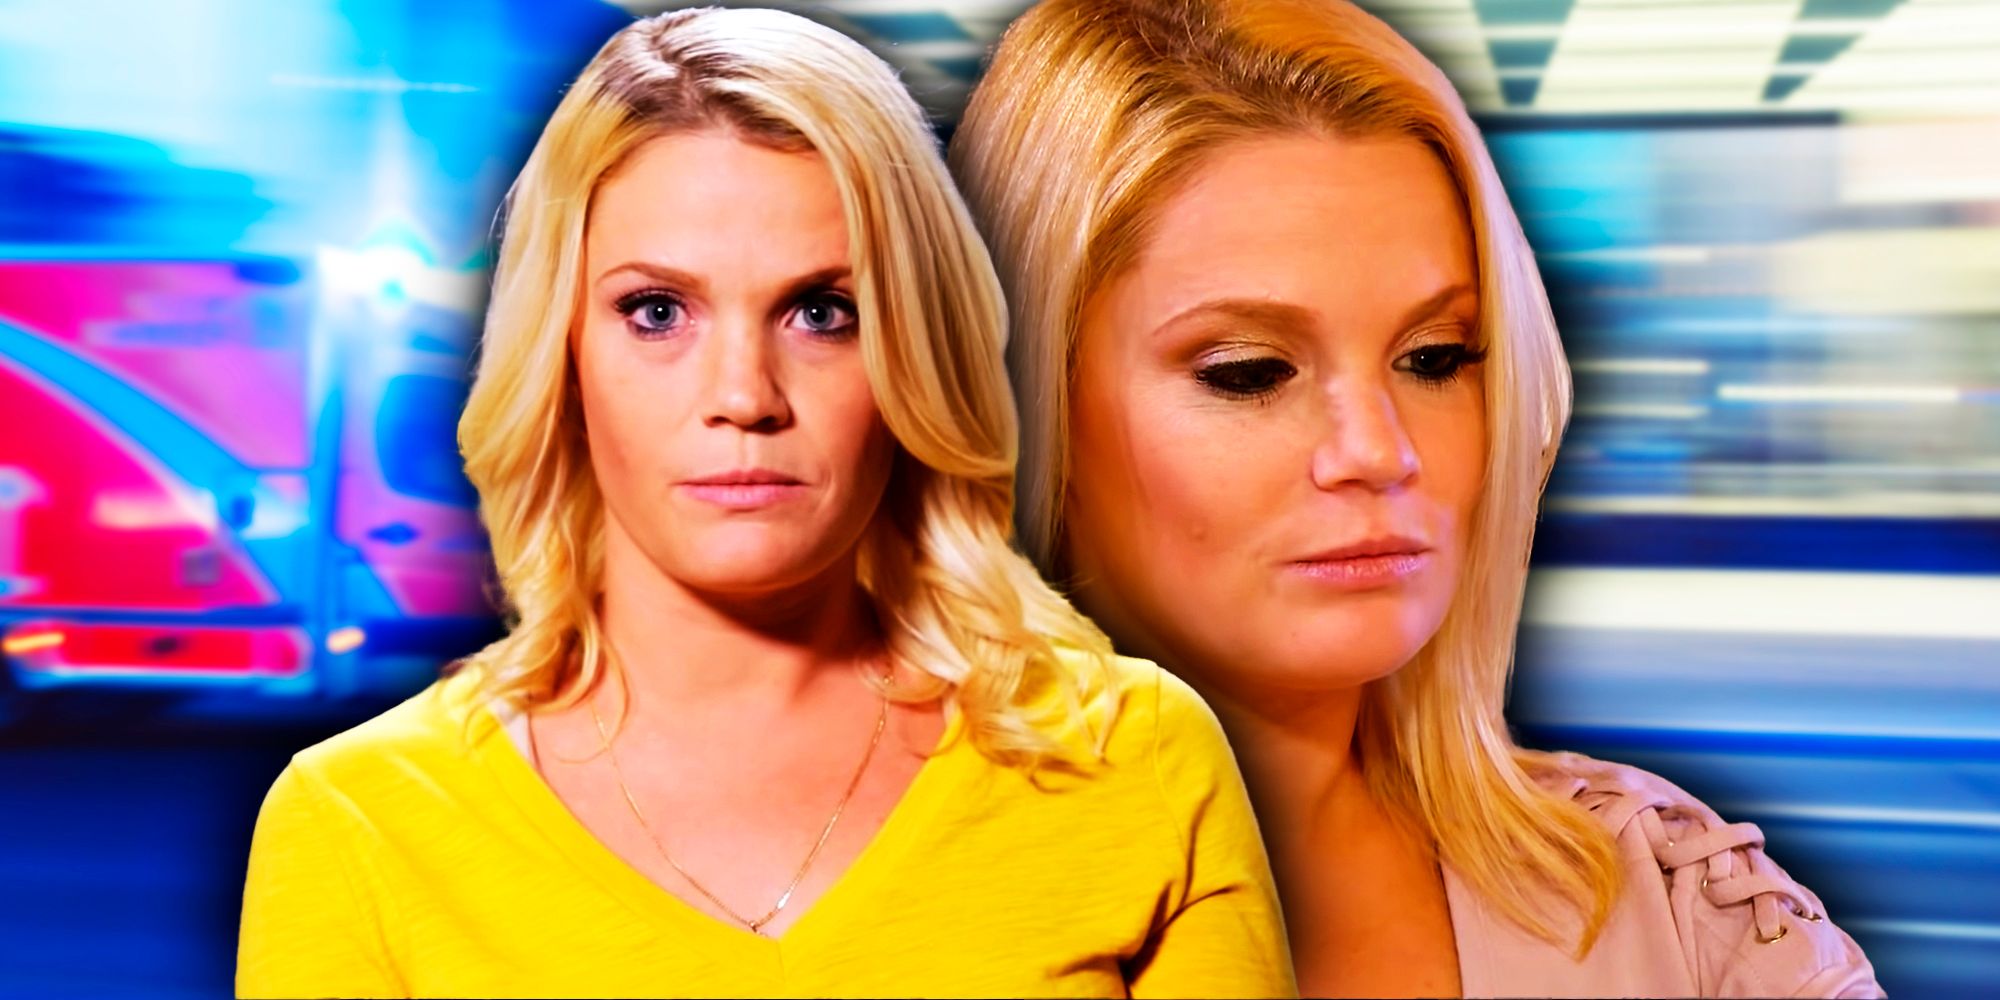 Side by side images of 90 Day Fiance's Ashley Martson